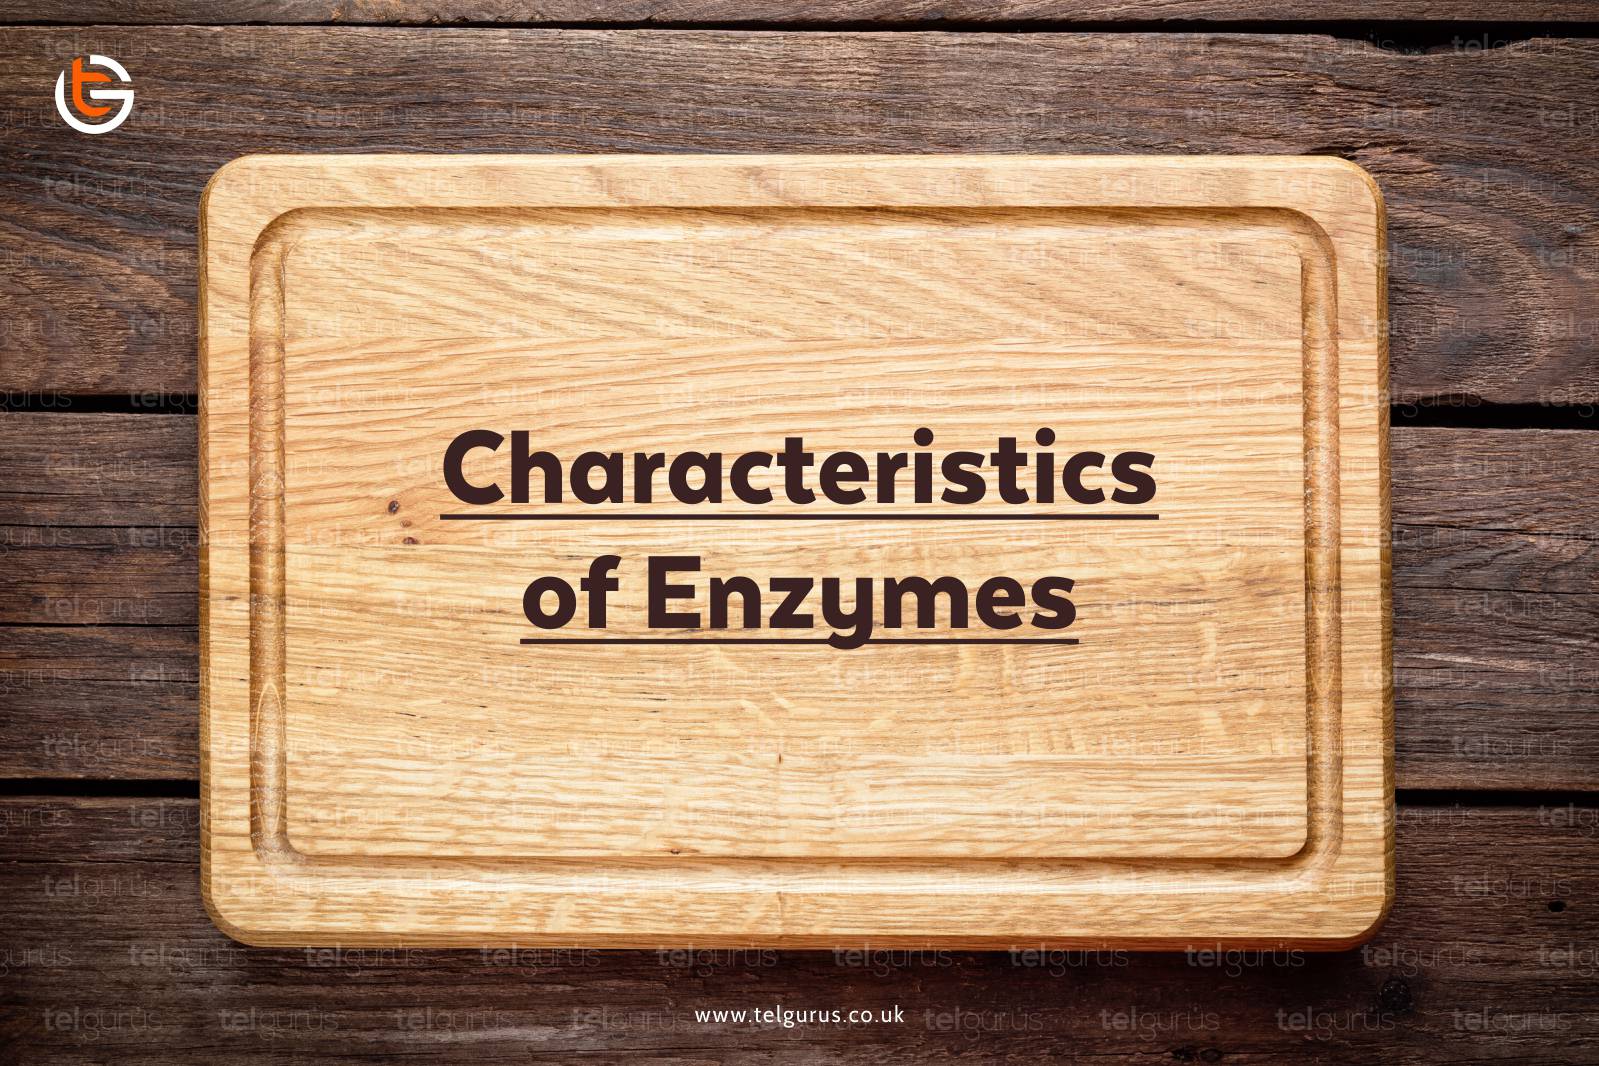 Characteristics of Enzymes